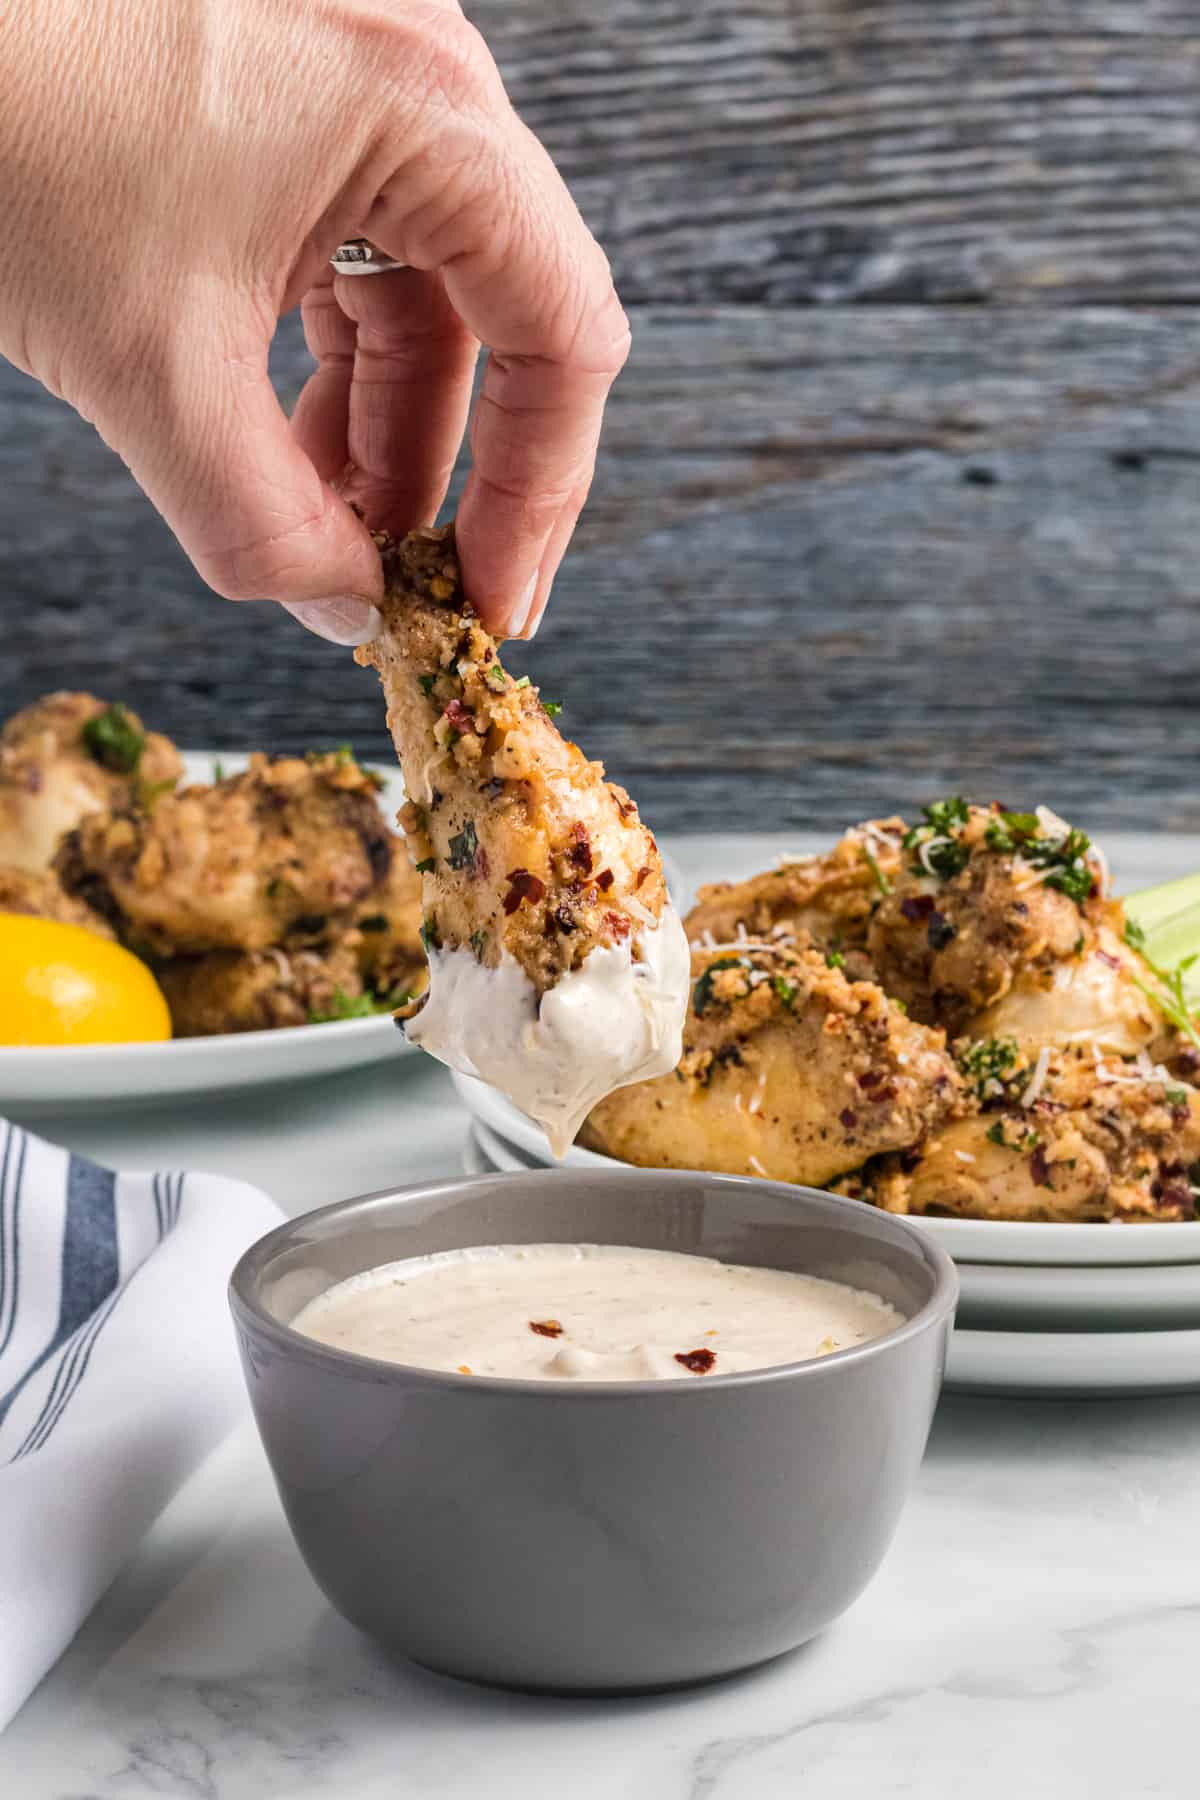 A chicken wing is being dipped into a container of white sauce.